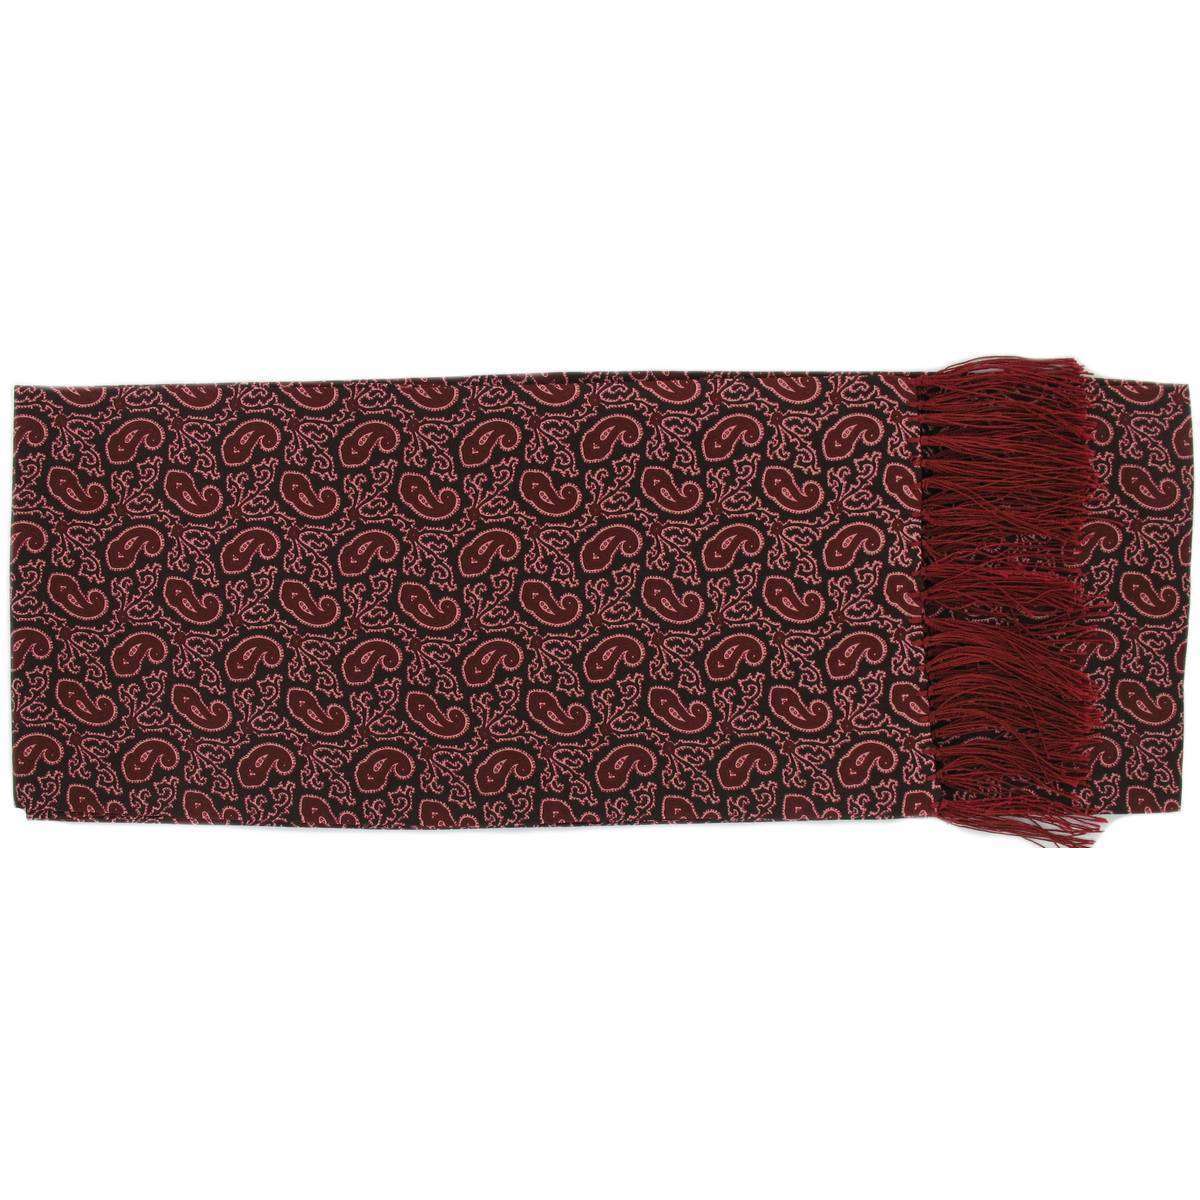 Michelsons of London Small Paisley Silk Scarf - Burgundy